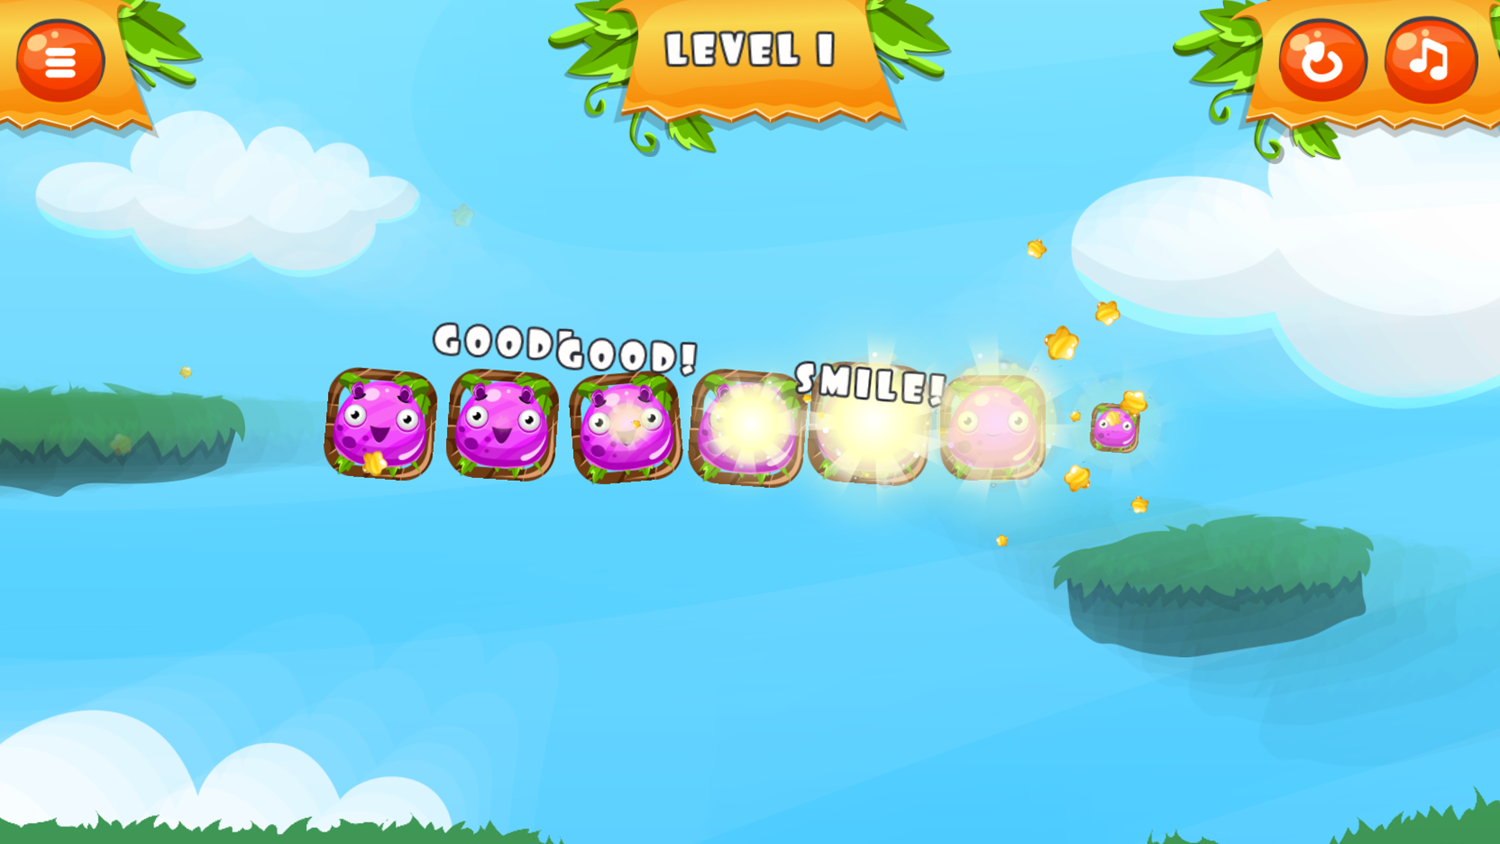 Happy Monsters Game Level Play Screenshot.